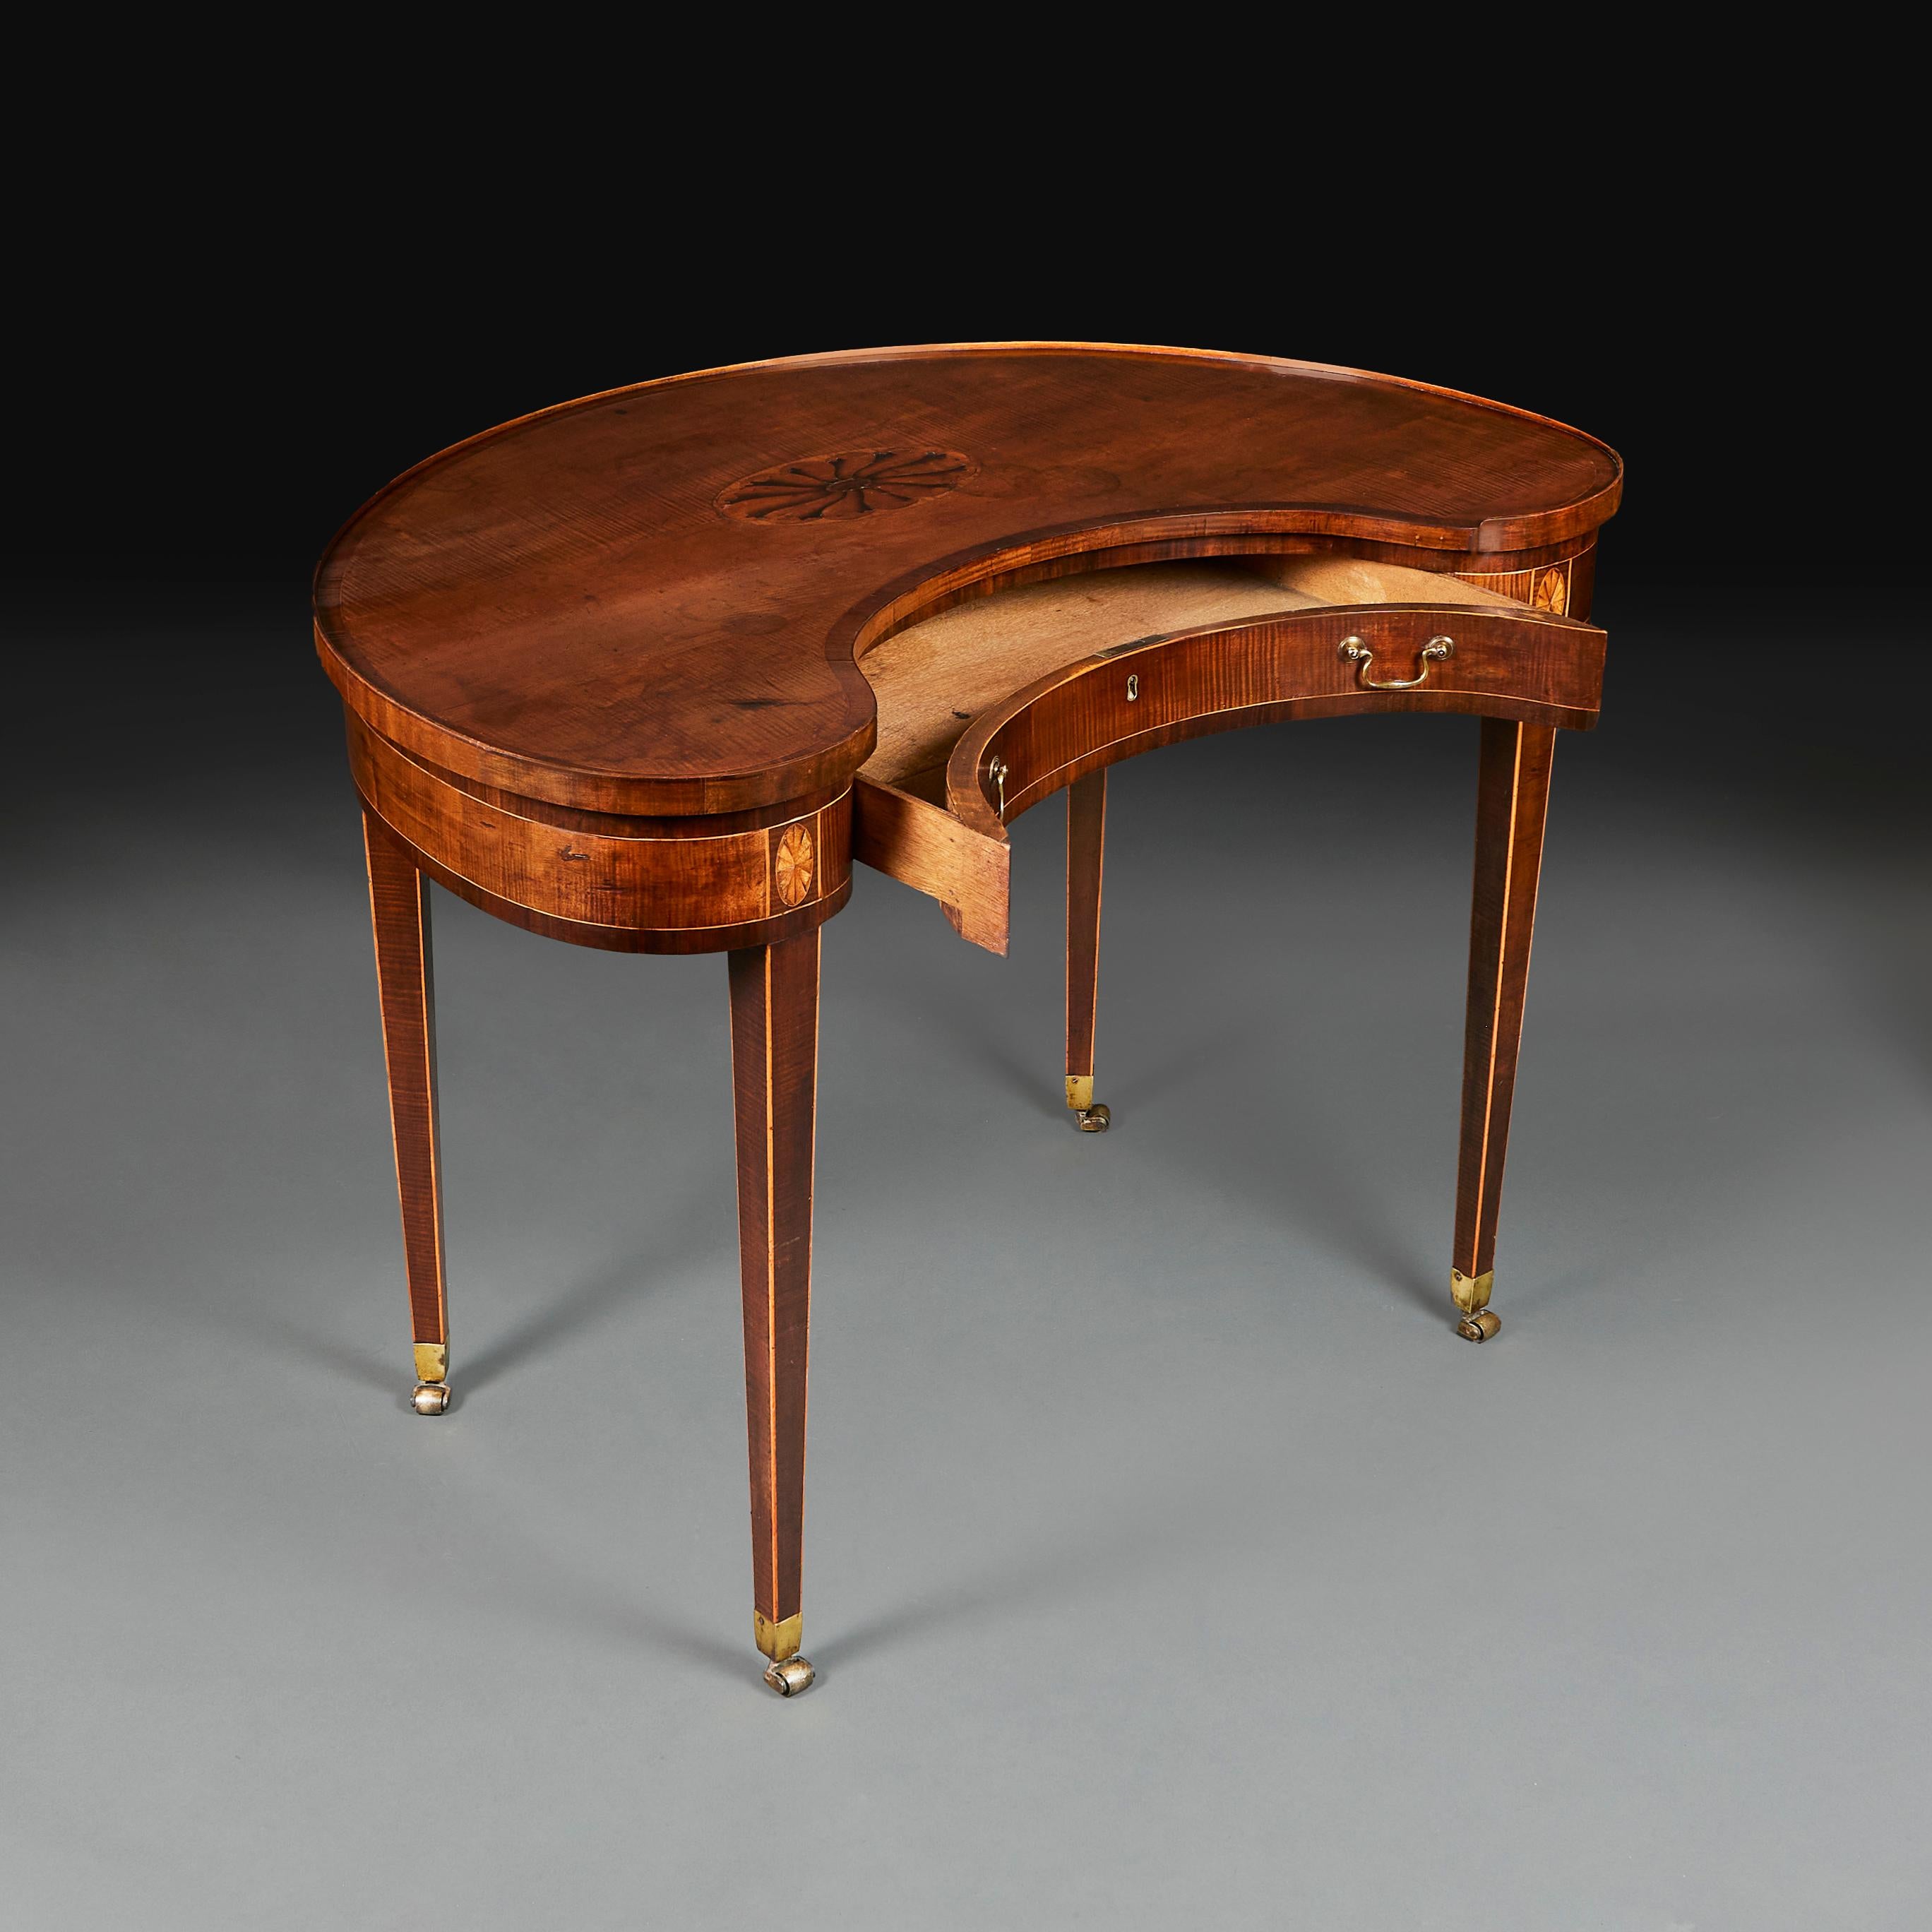 An Early 19th Century English Kidney Shape Writing Table or Desk 1